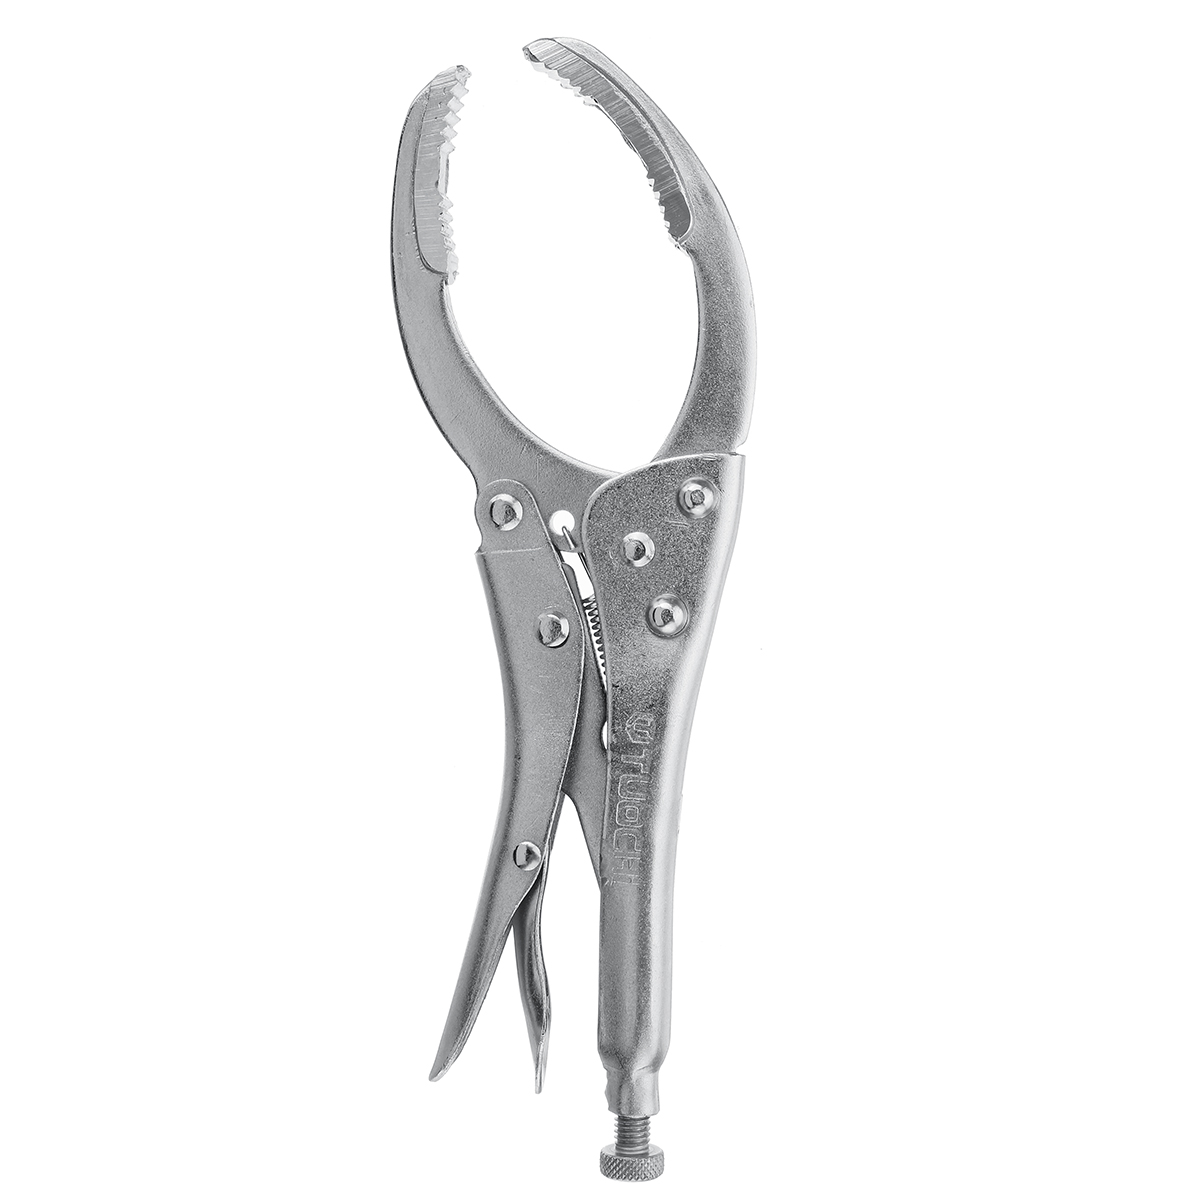 Self-Grip-Oil-Filter-Removal-Tool-Wrench-Pliers-Multi-Purpose-Hand-Remover-Tool-1446280-2